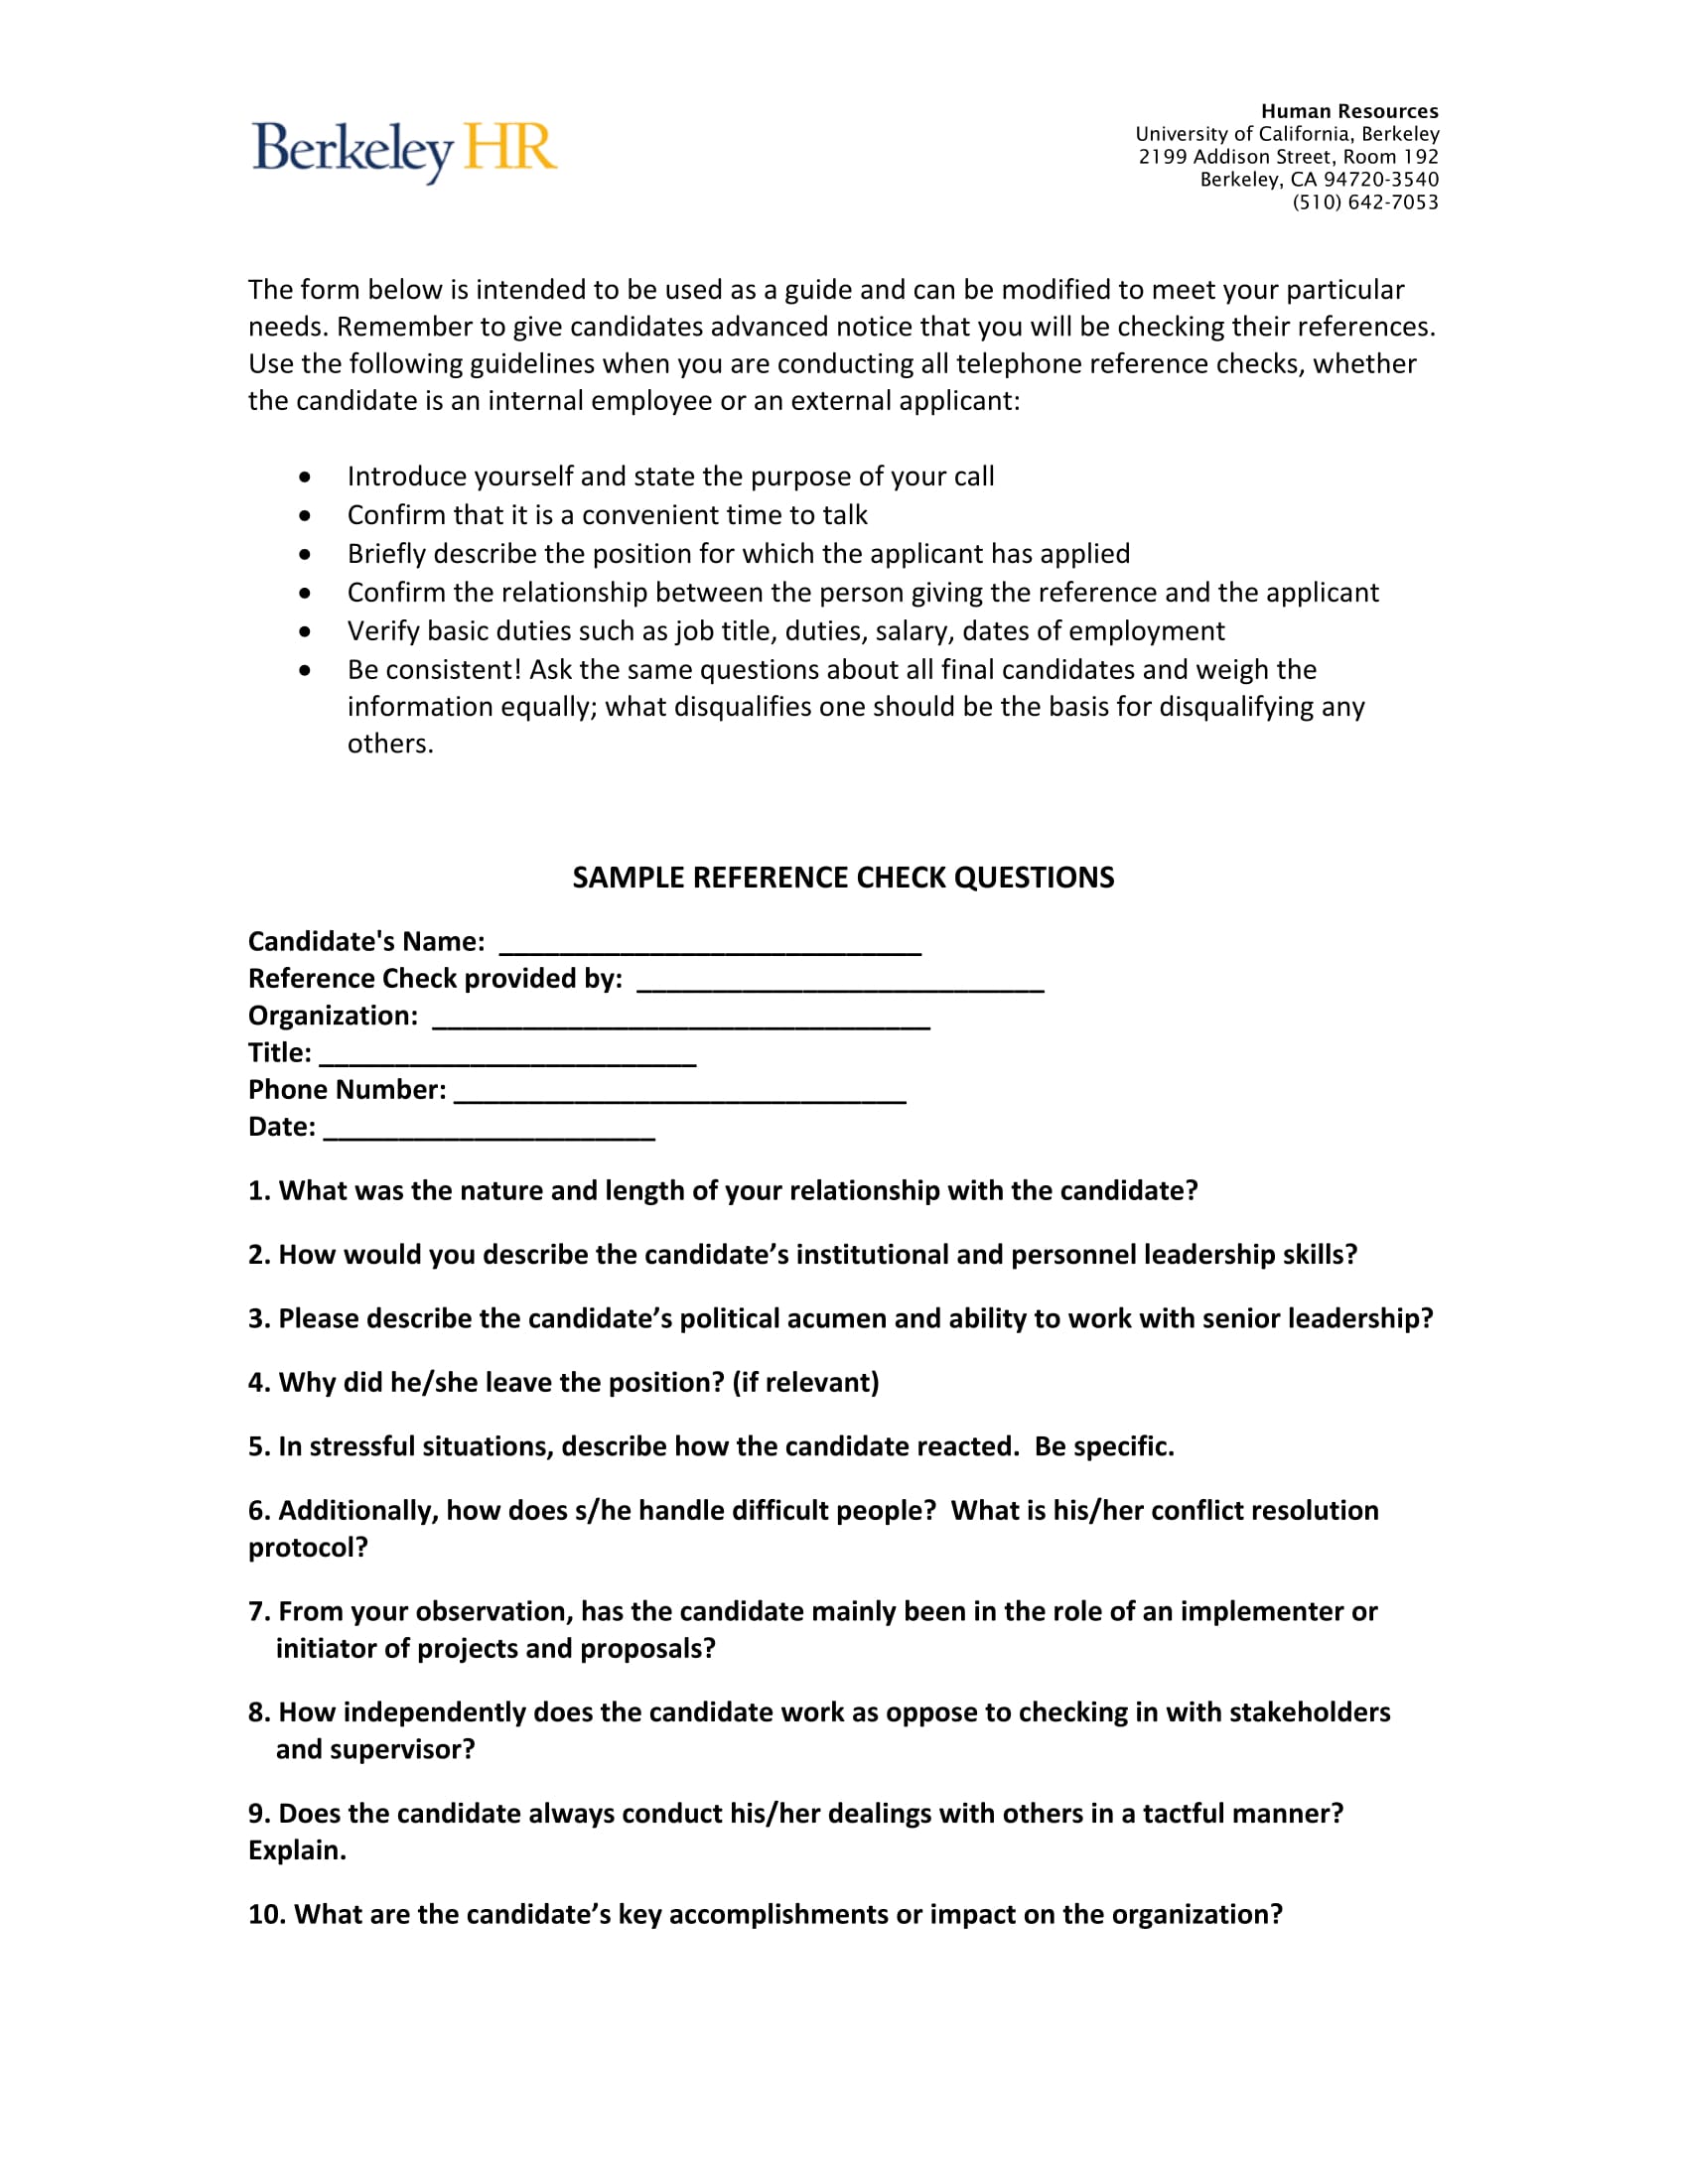 reference check questionnaire form 1